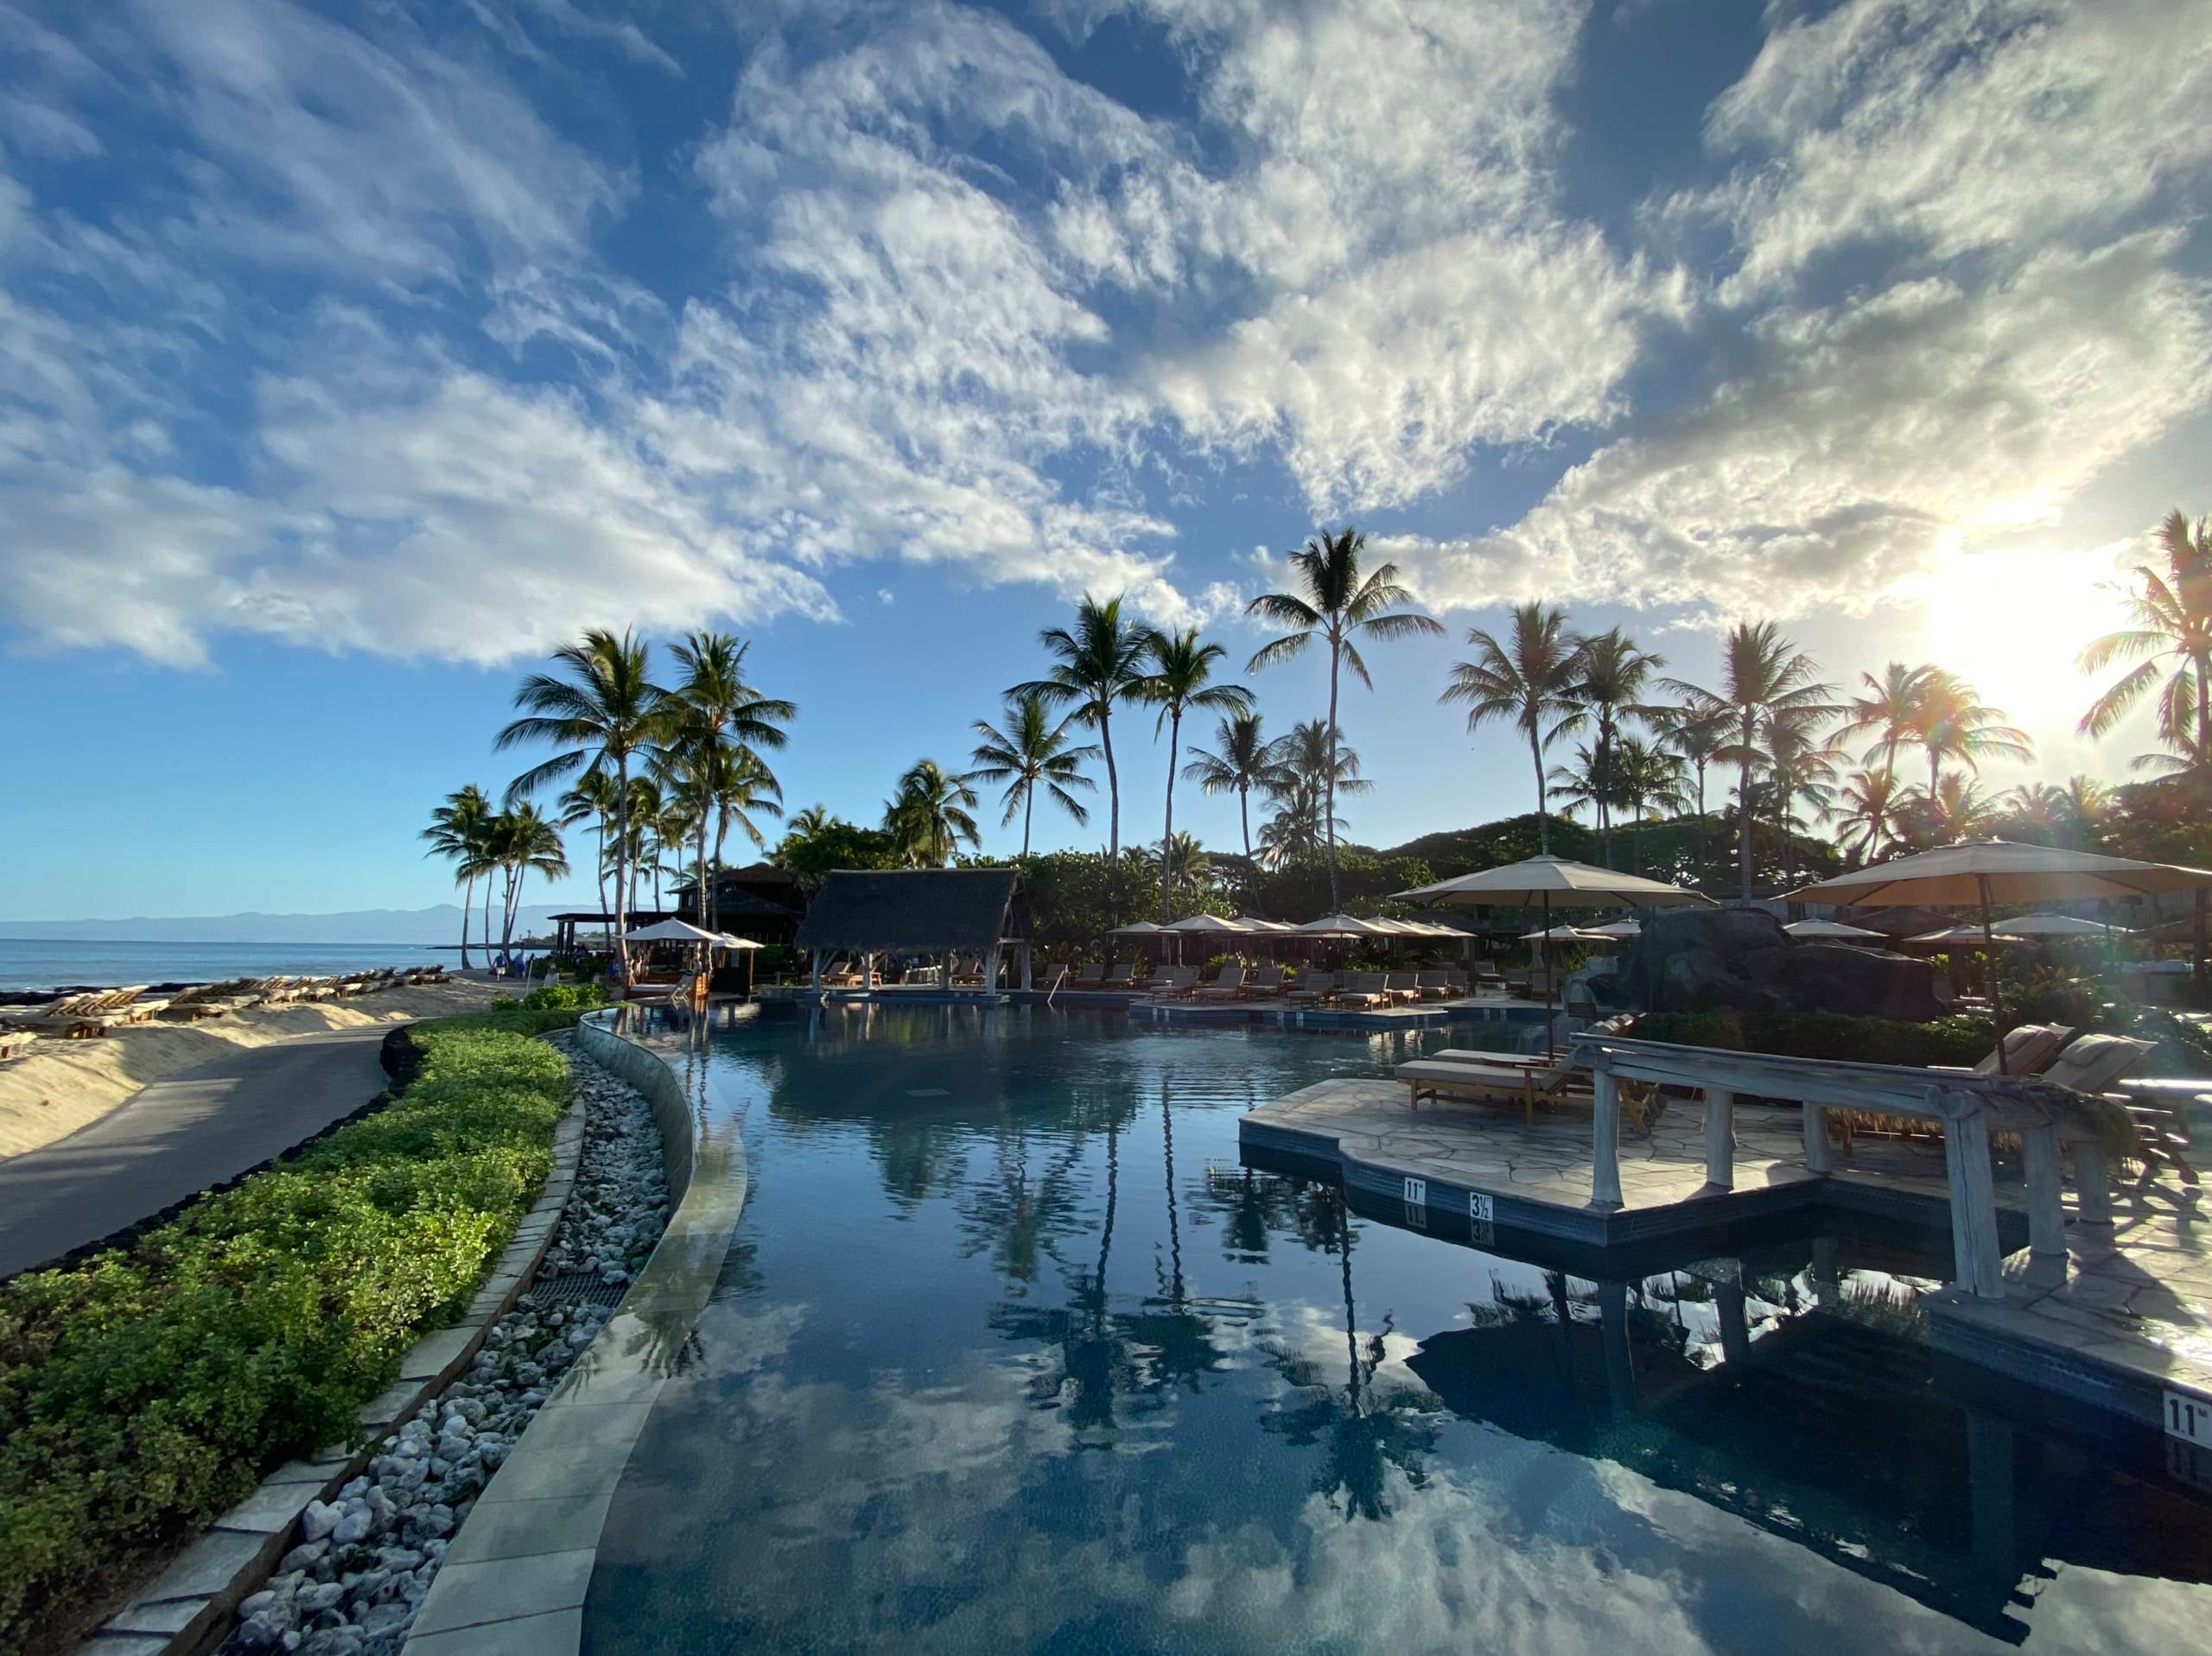 You’ll cry when you leave: A review of the Four Seasons Hualalai resort in Hawaii